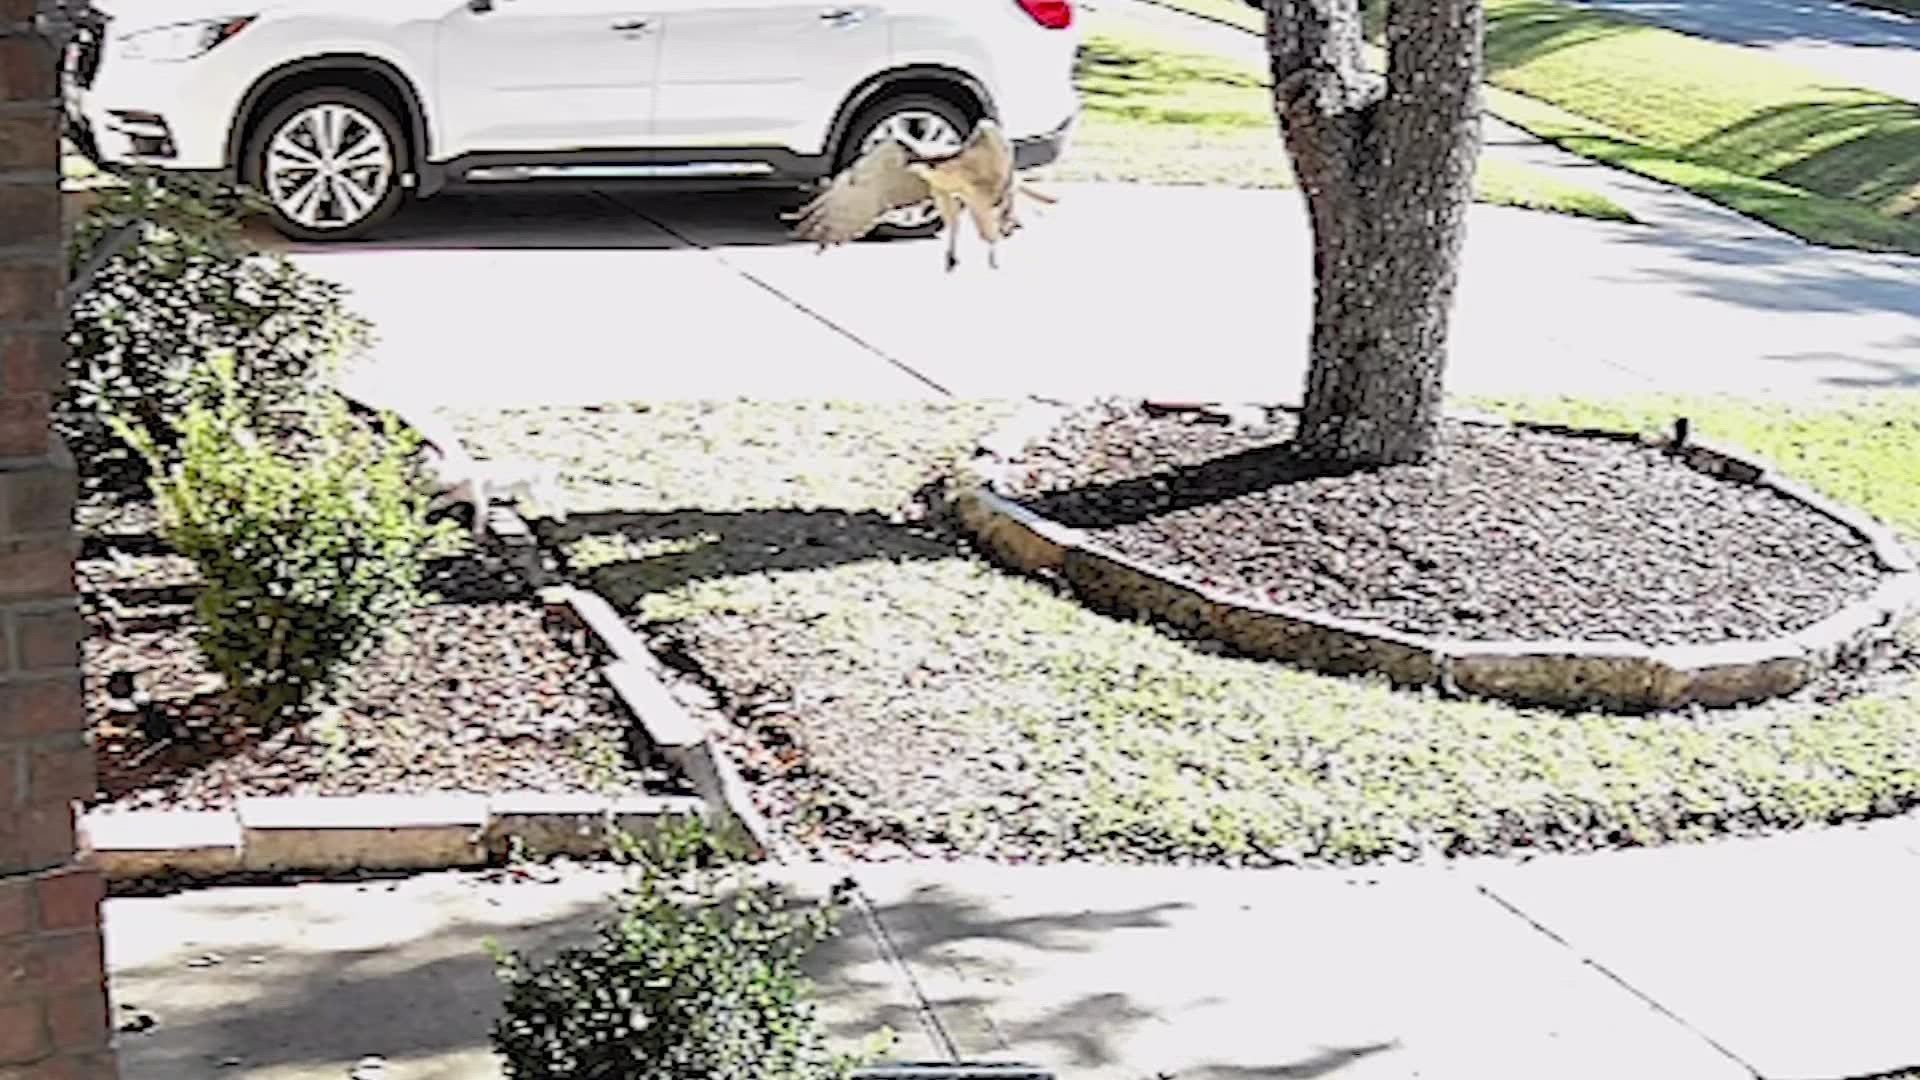 Lola was in the front yard of her Sienna home when the hawk swooped in and tried to grab her with its powerful talons.